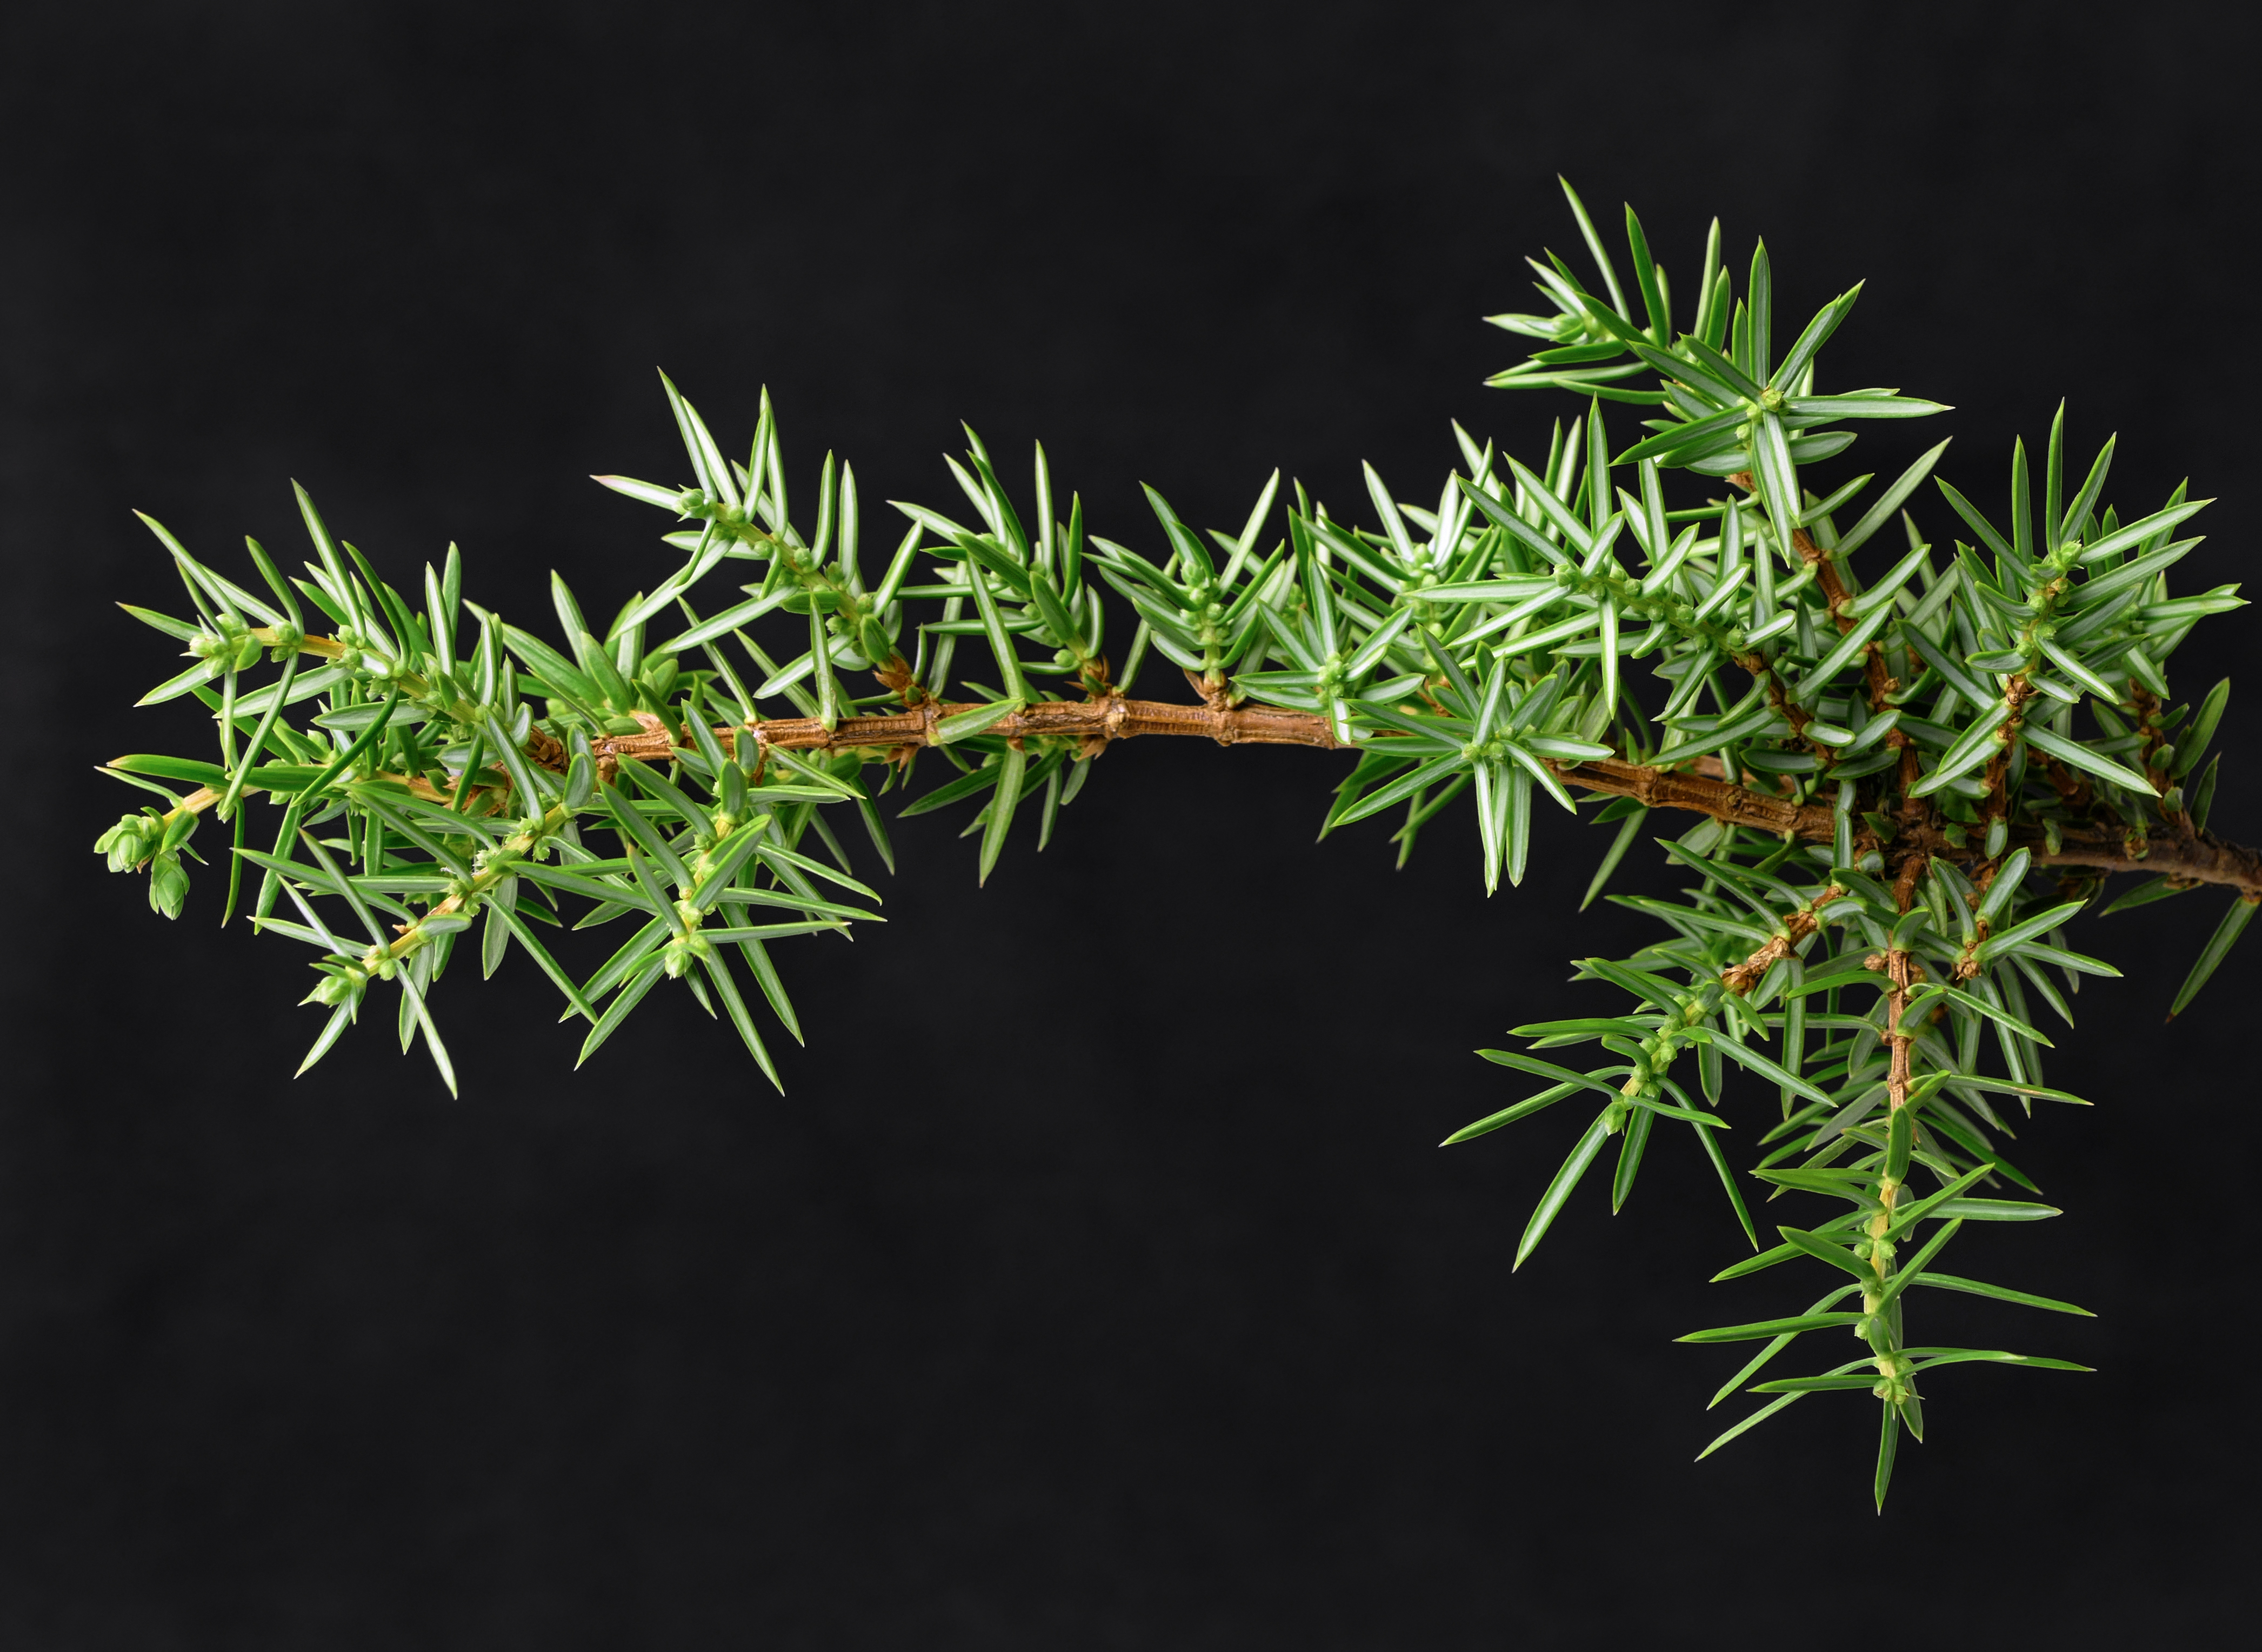 Branched juniper twig with shots